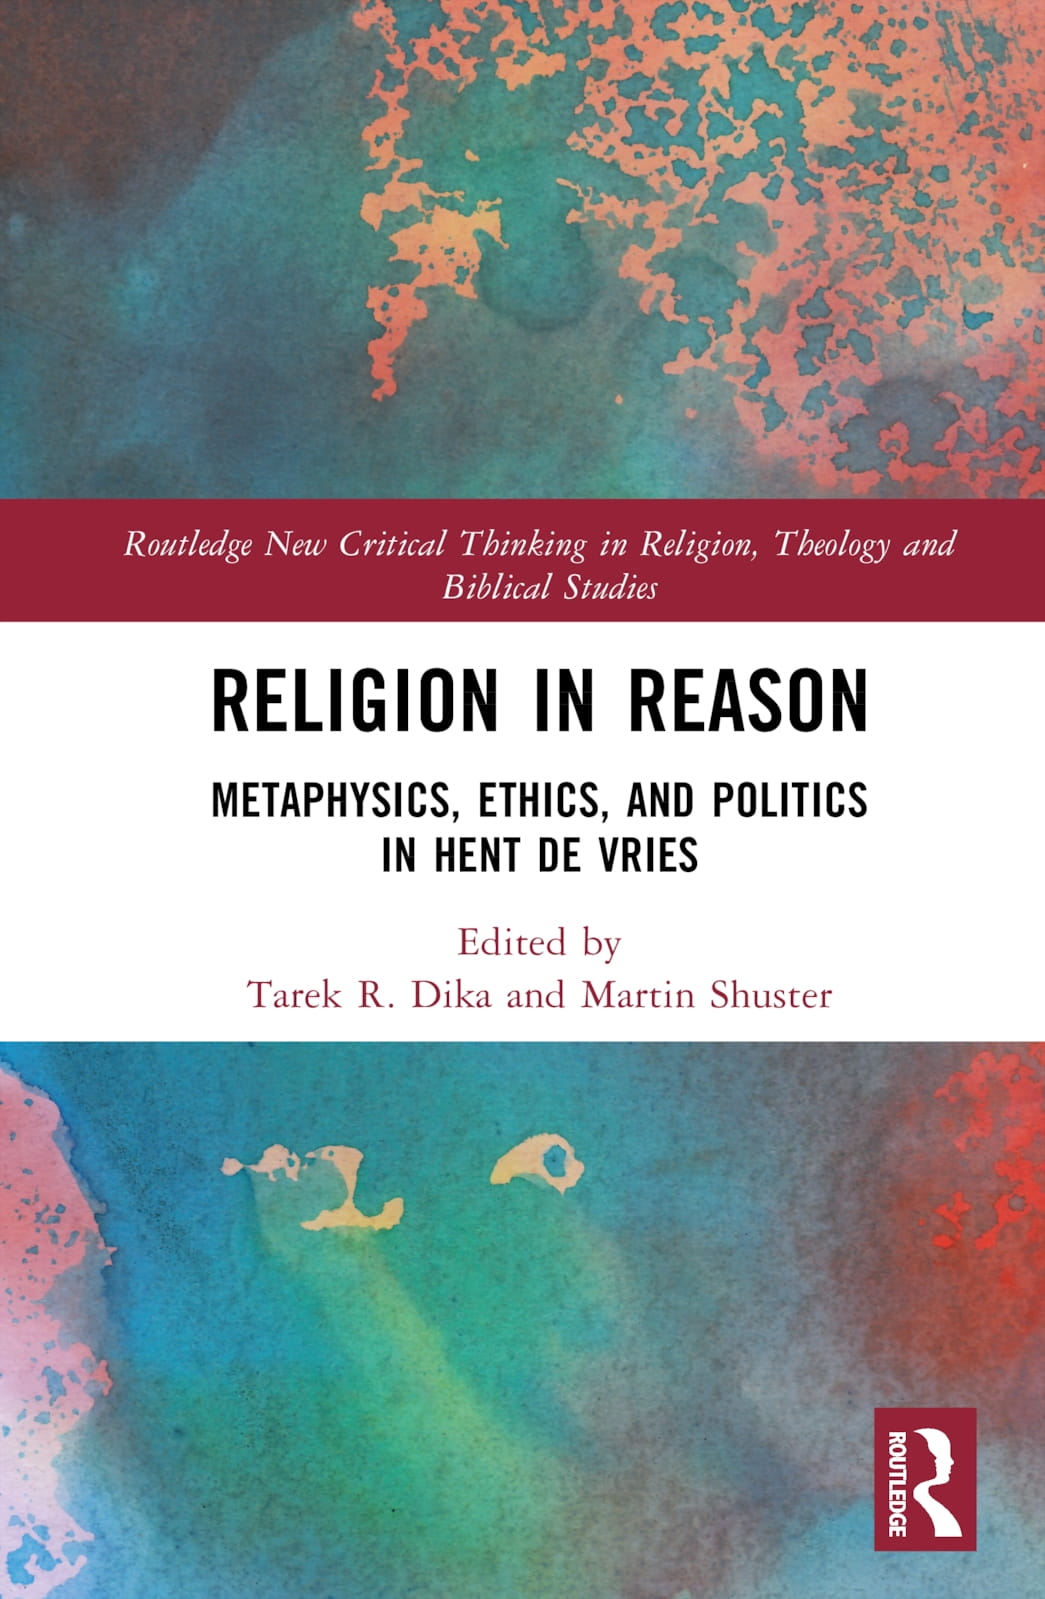 Religion in Reason: Metaphysics, Ethics, and Politics in Hent de Vries